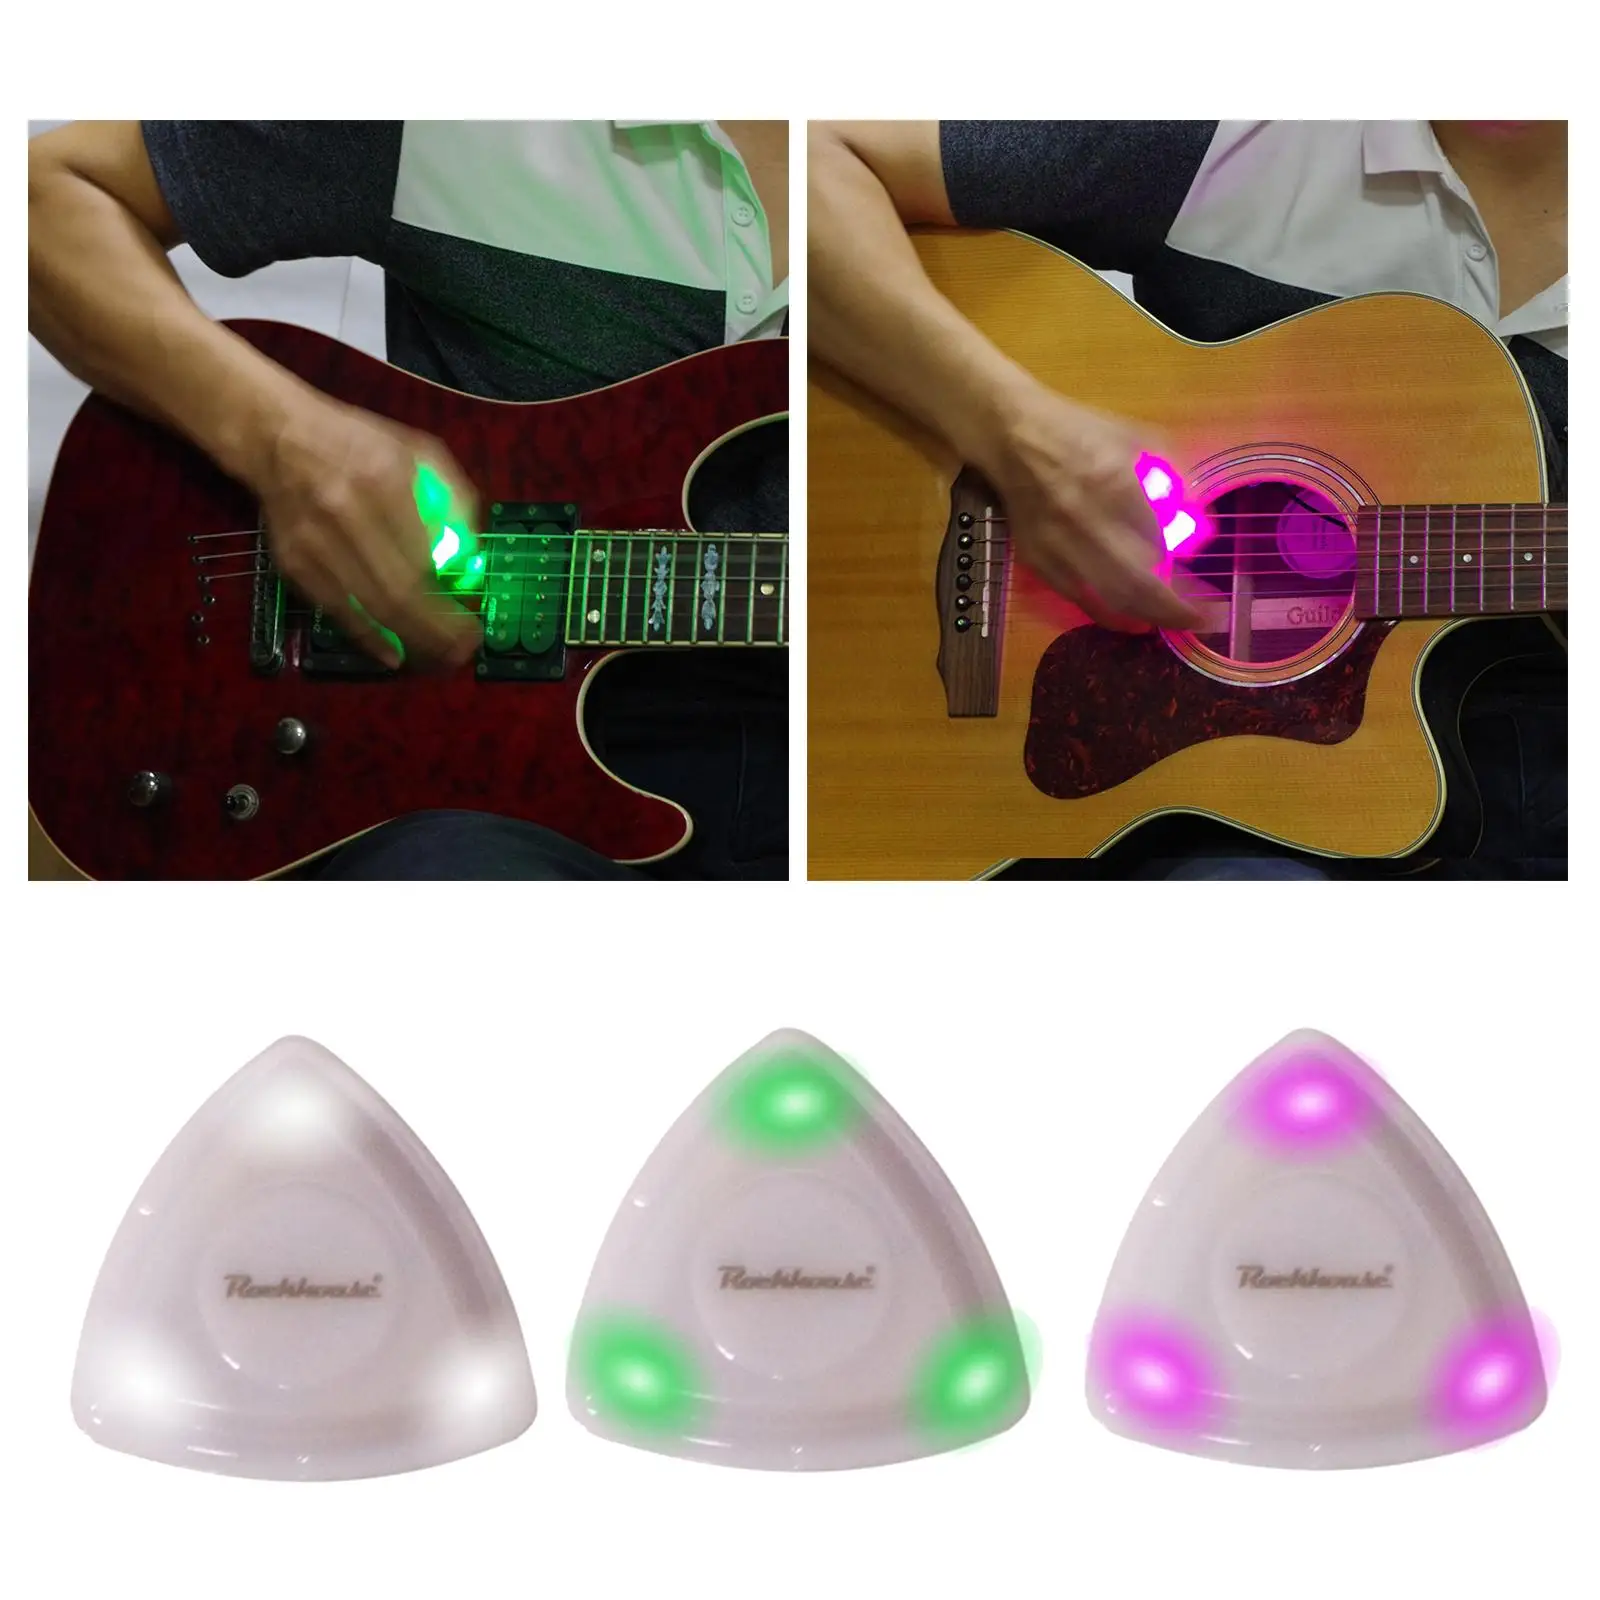 Unique Guitar Picks Medium Picks Plastic with LED Light, White/Green/ Guitar  for Bass Electric Guitar Acoustic guitarists